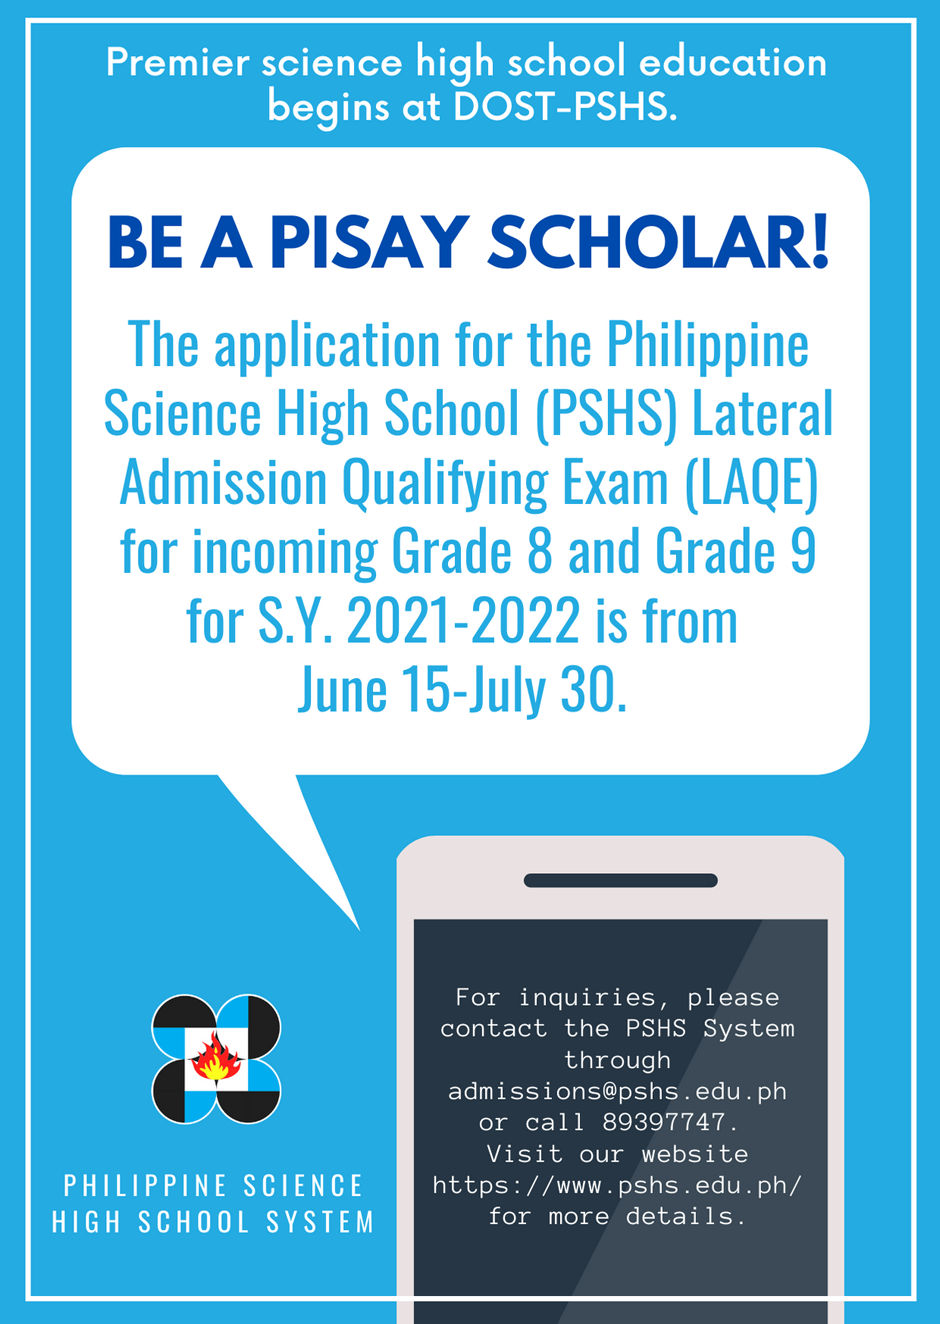 PSHS Lateral Admission Qualifying Exam for SY 2021-2022